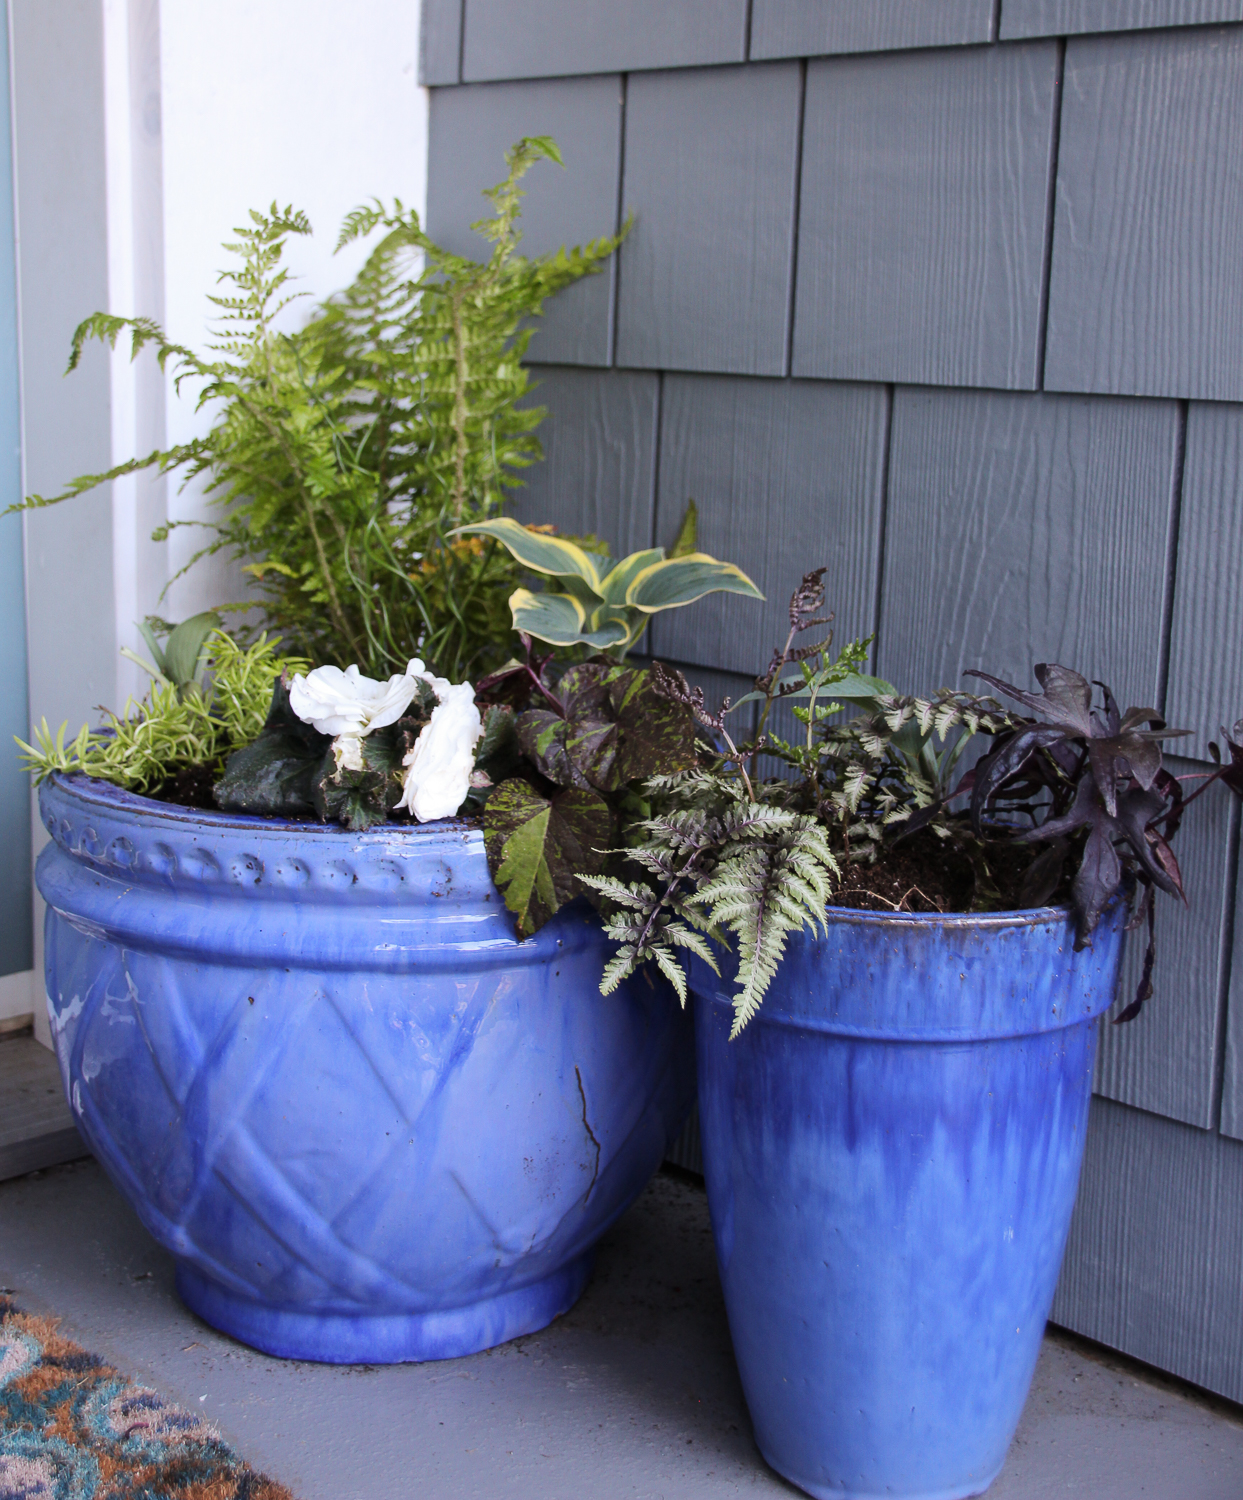 Bright blue pots filled with shade plants on the porch.